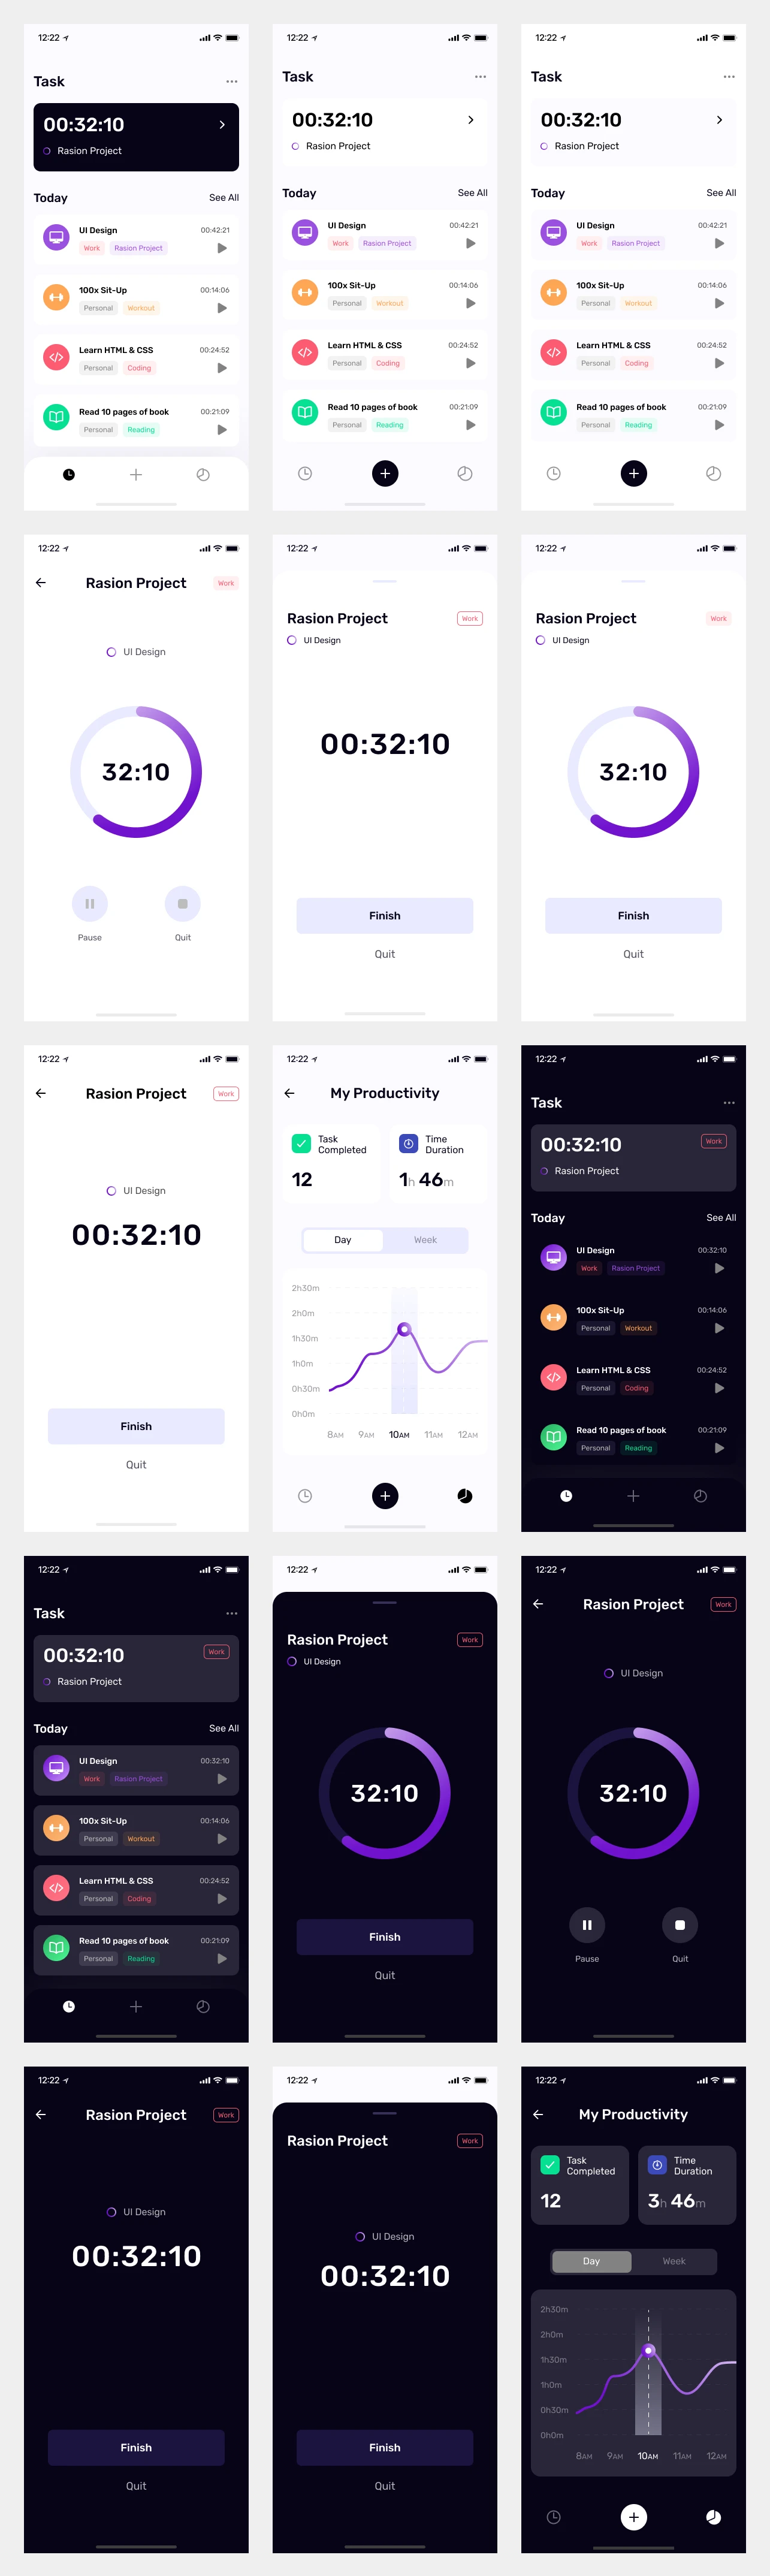 TimePad - Time Tracker Free UI Kit for Figma - Enjoy TimePad, minimal and clean app design, 15 screens for you to get started